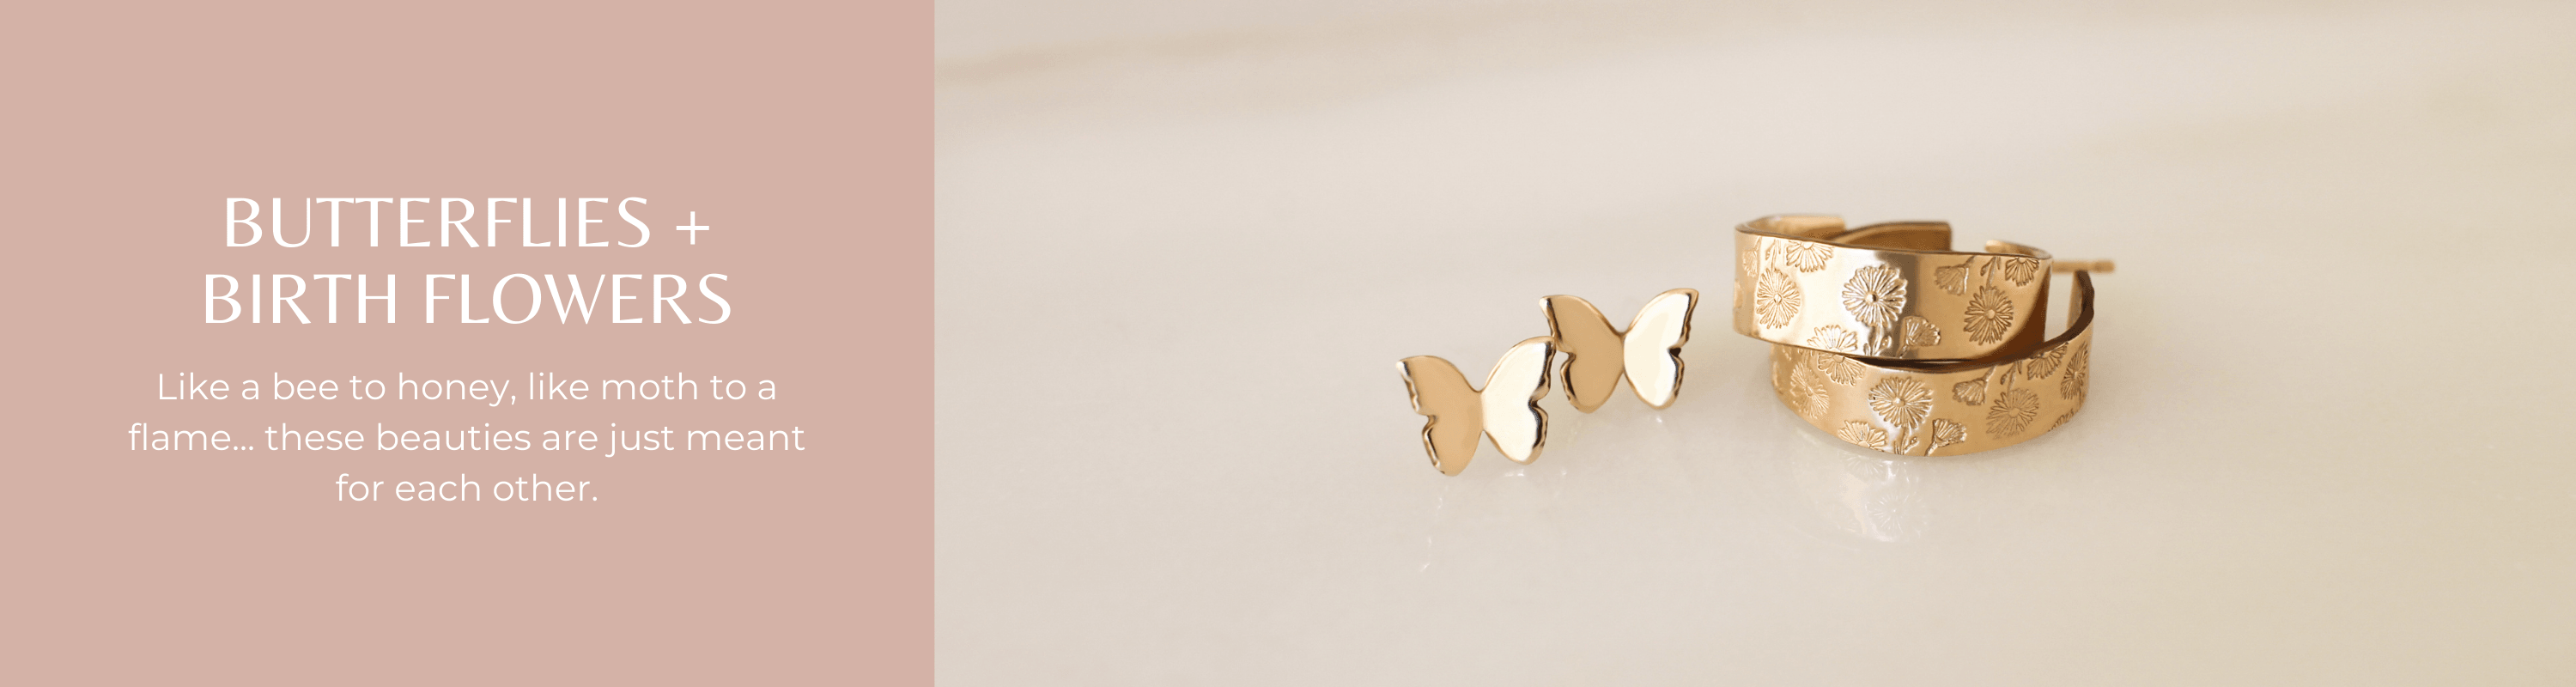 Butterflies + Birth Flowers - Nolia Jewelry - Meaningful + Sustainably Handcrafted Jewelry